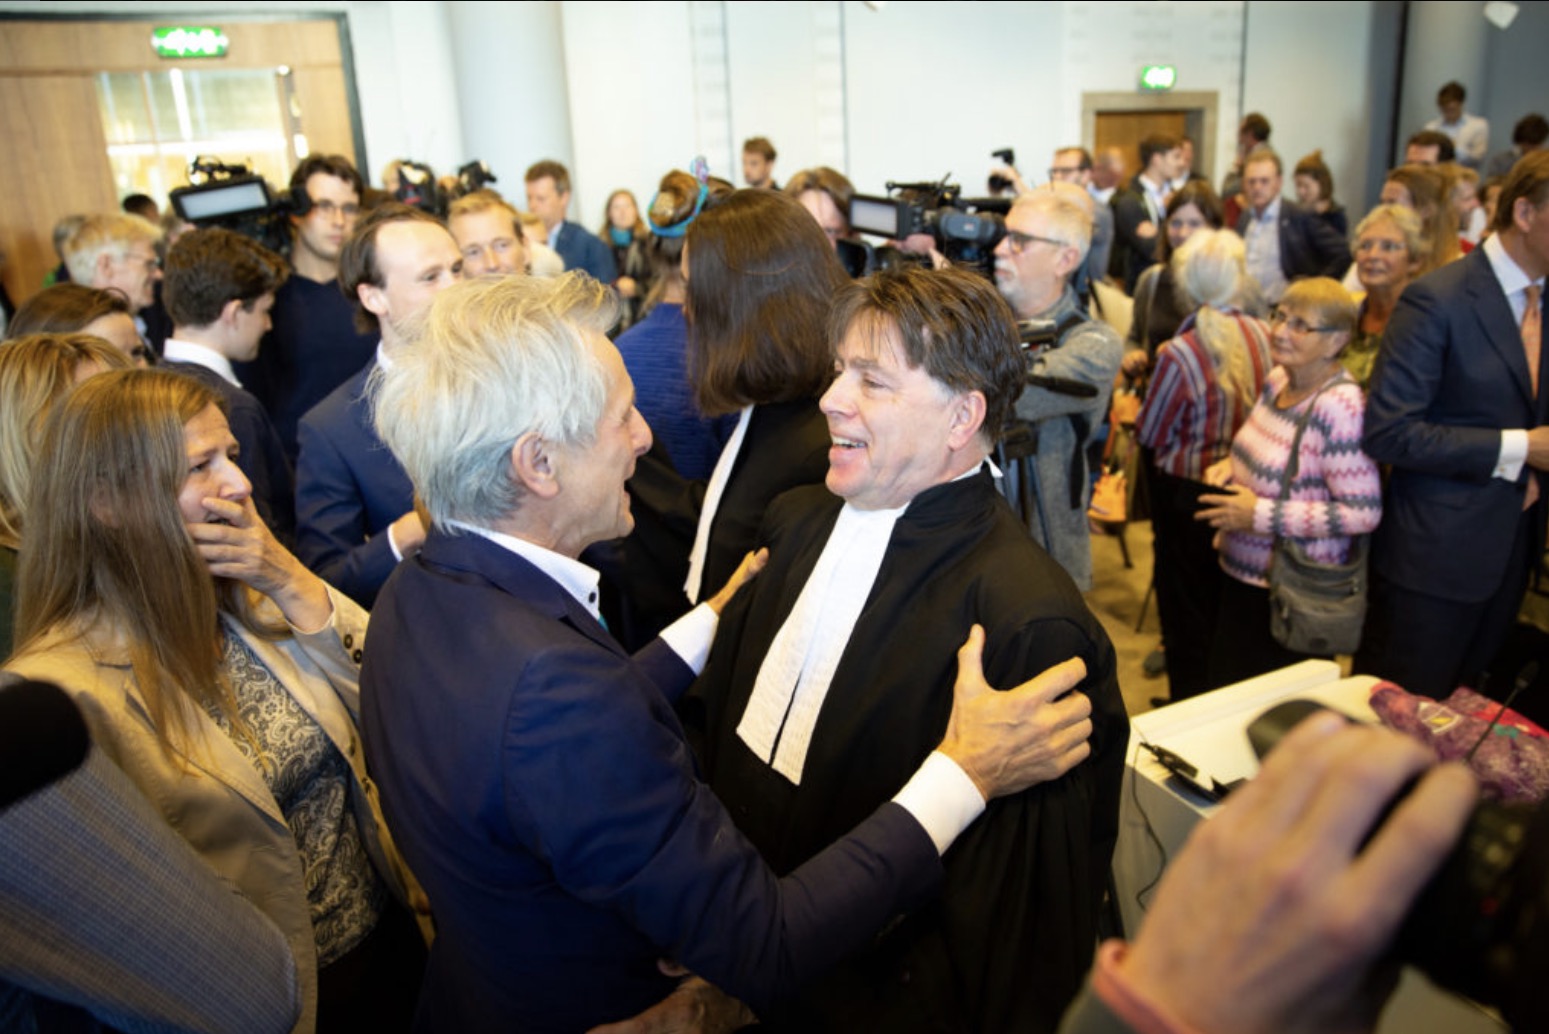 20 December 2019 - Netherlands’ Supreme Court upholds landmark ruling in Urgenda v. the Netherlands, announcing its decision that governments have a human rights duty to protect their citizens from climate change — the first case in the world in which a national court issued a specific order to reduce greenhouse gas emissions to a government on the basis of human rights.